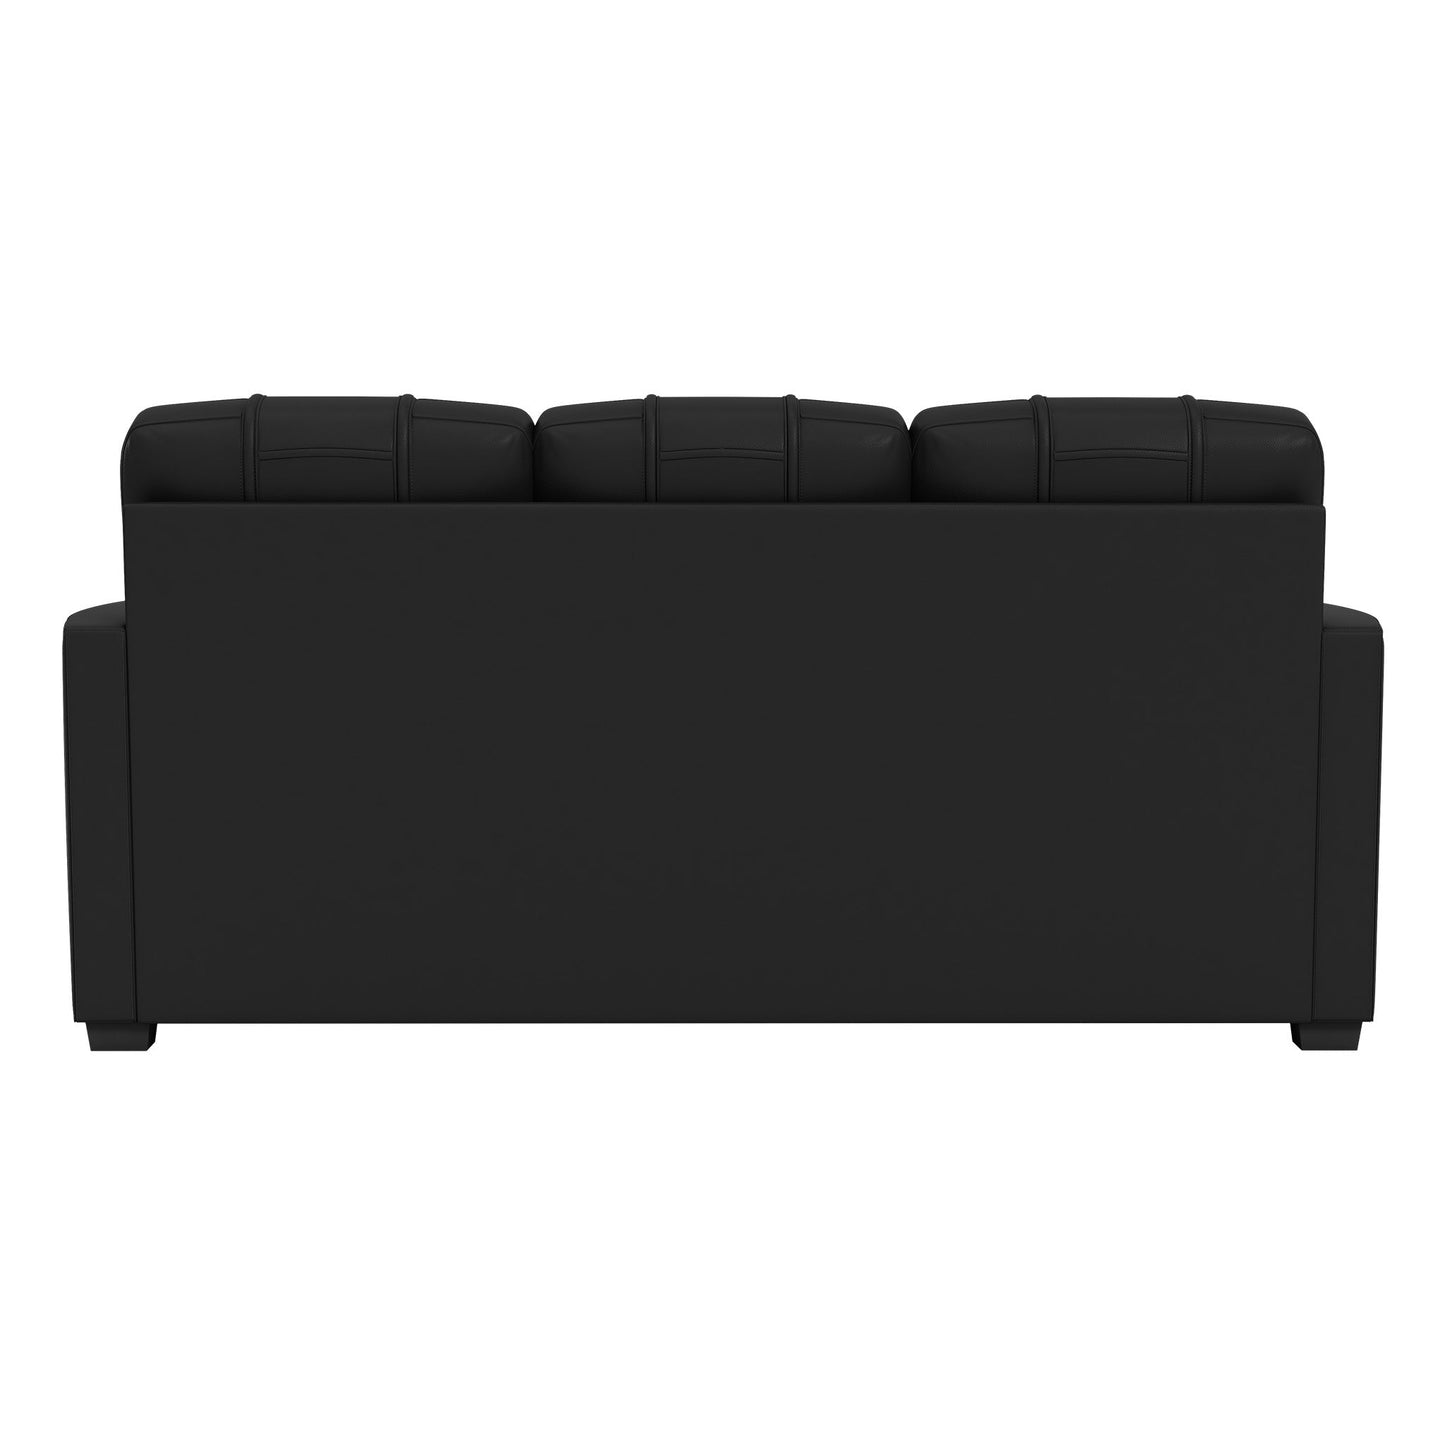 Silver Sofa with Memphis Tigers Secondary Logo